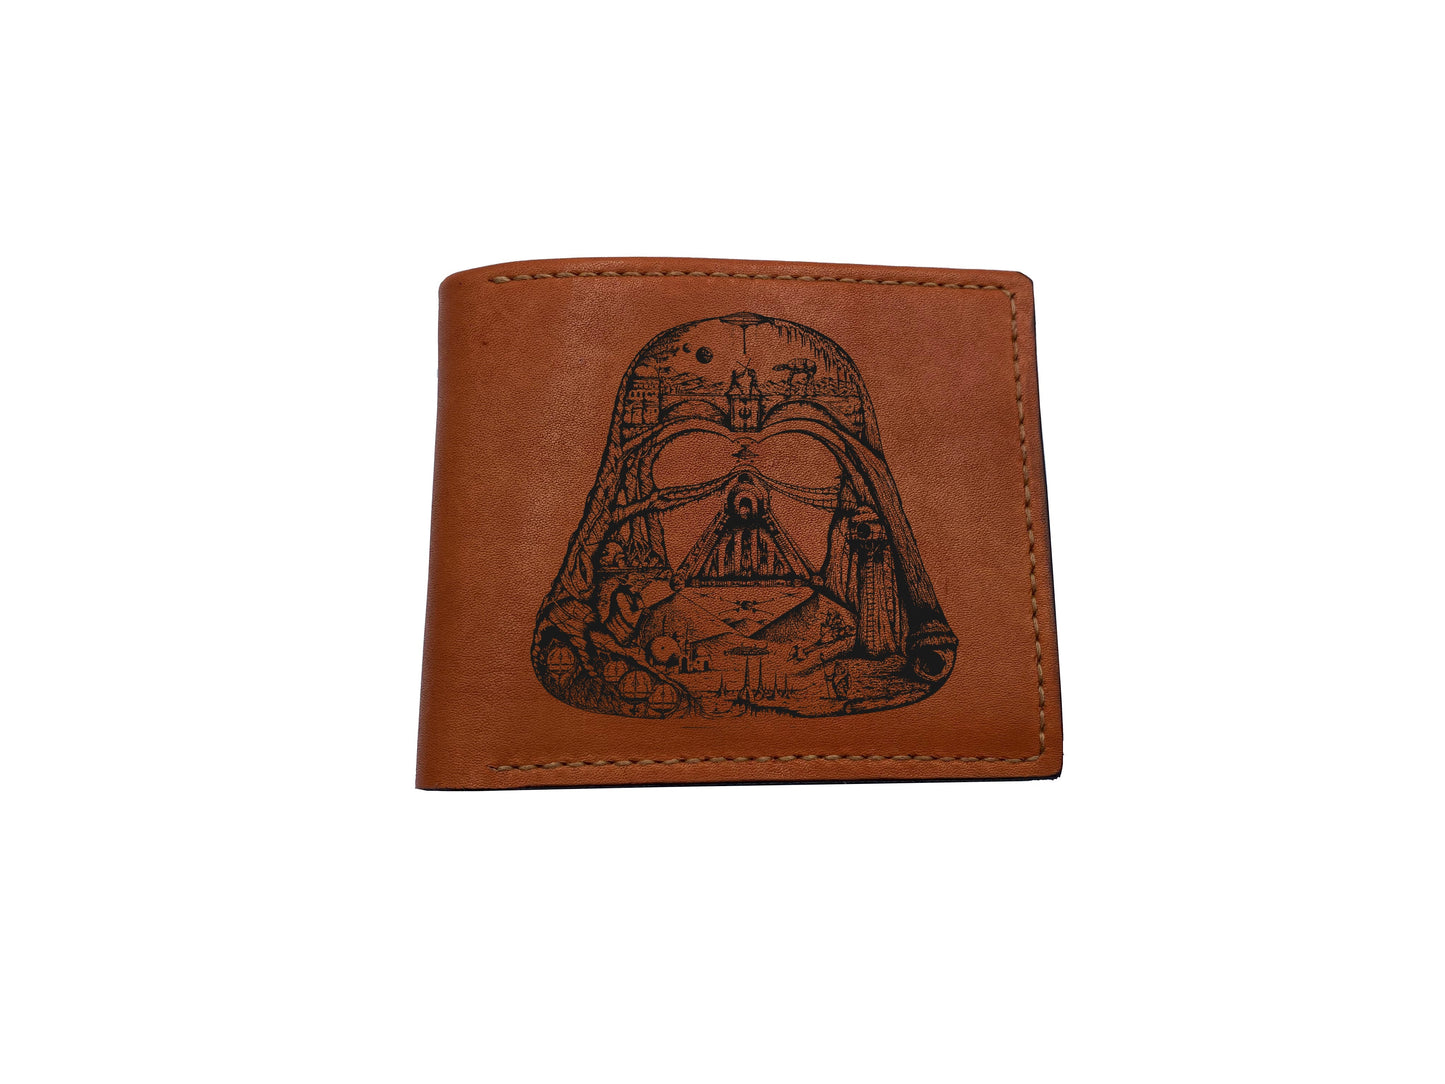 Personalized Starwars leather men's wallet, leather anniversary present for dad, husband, brother, starwars fan art gifts